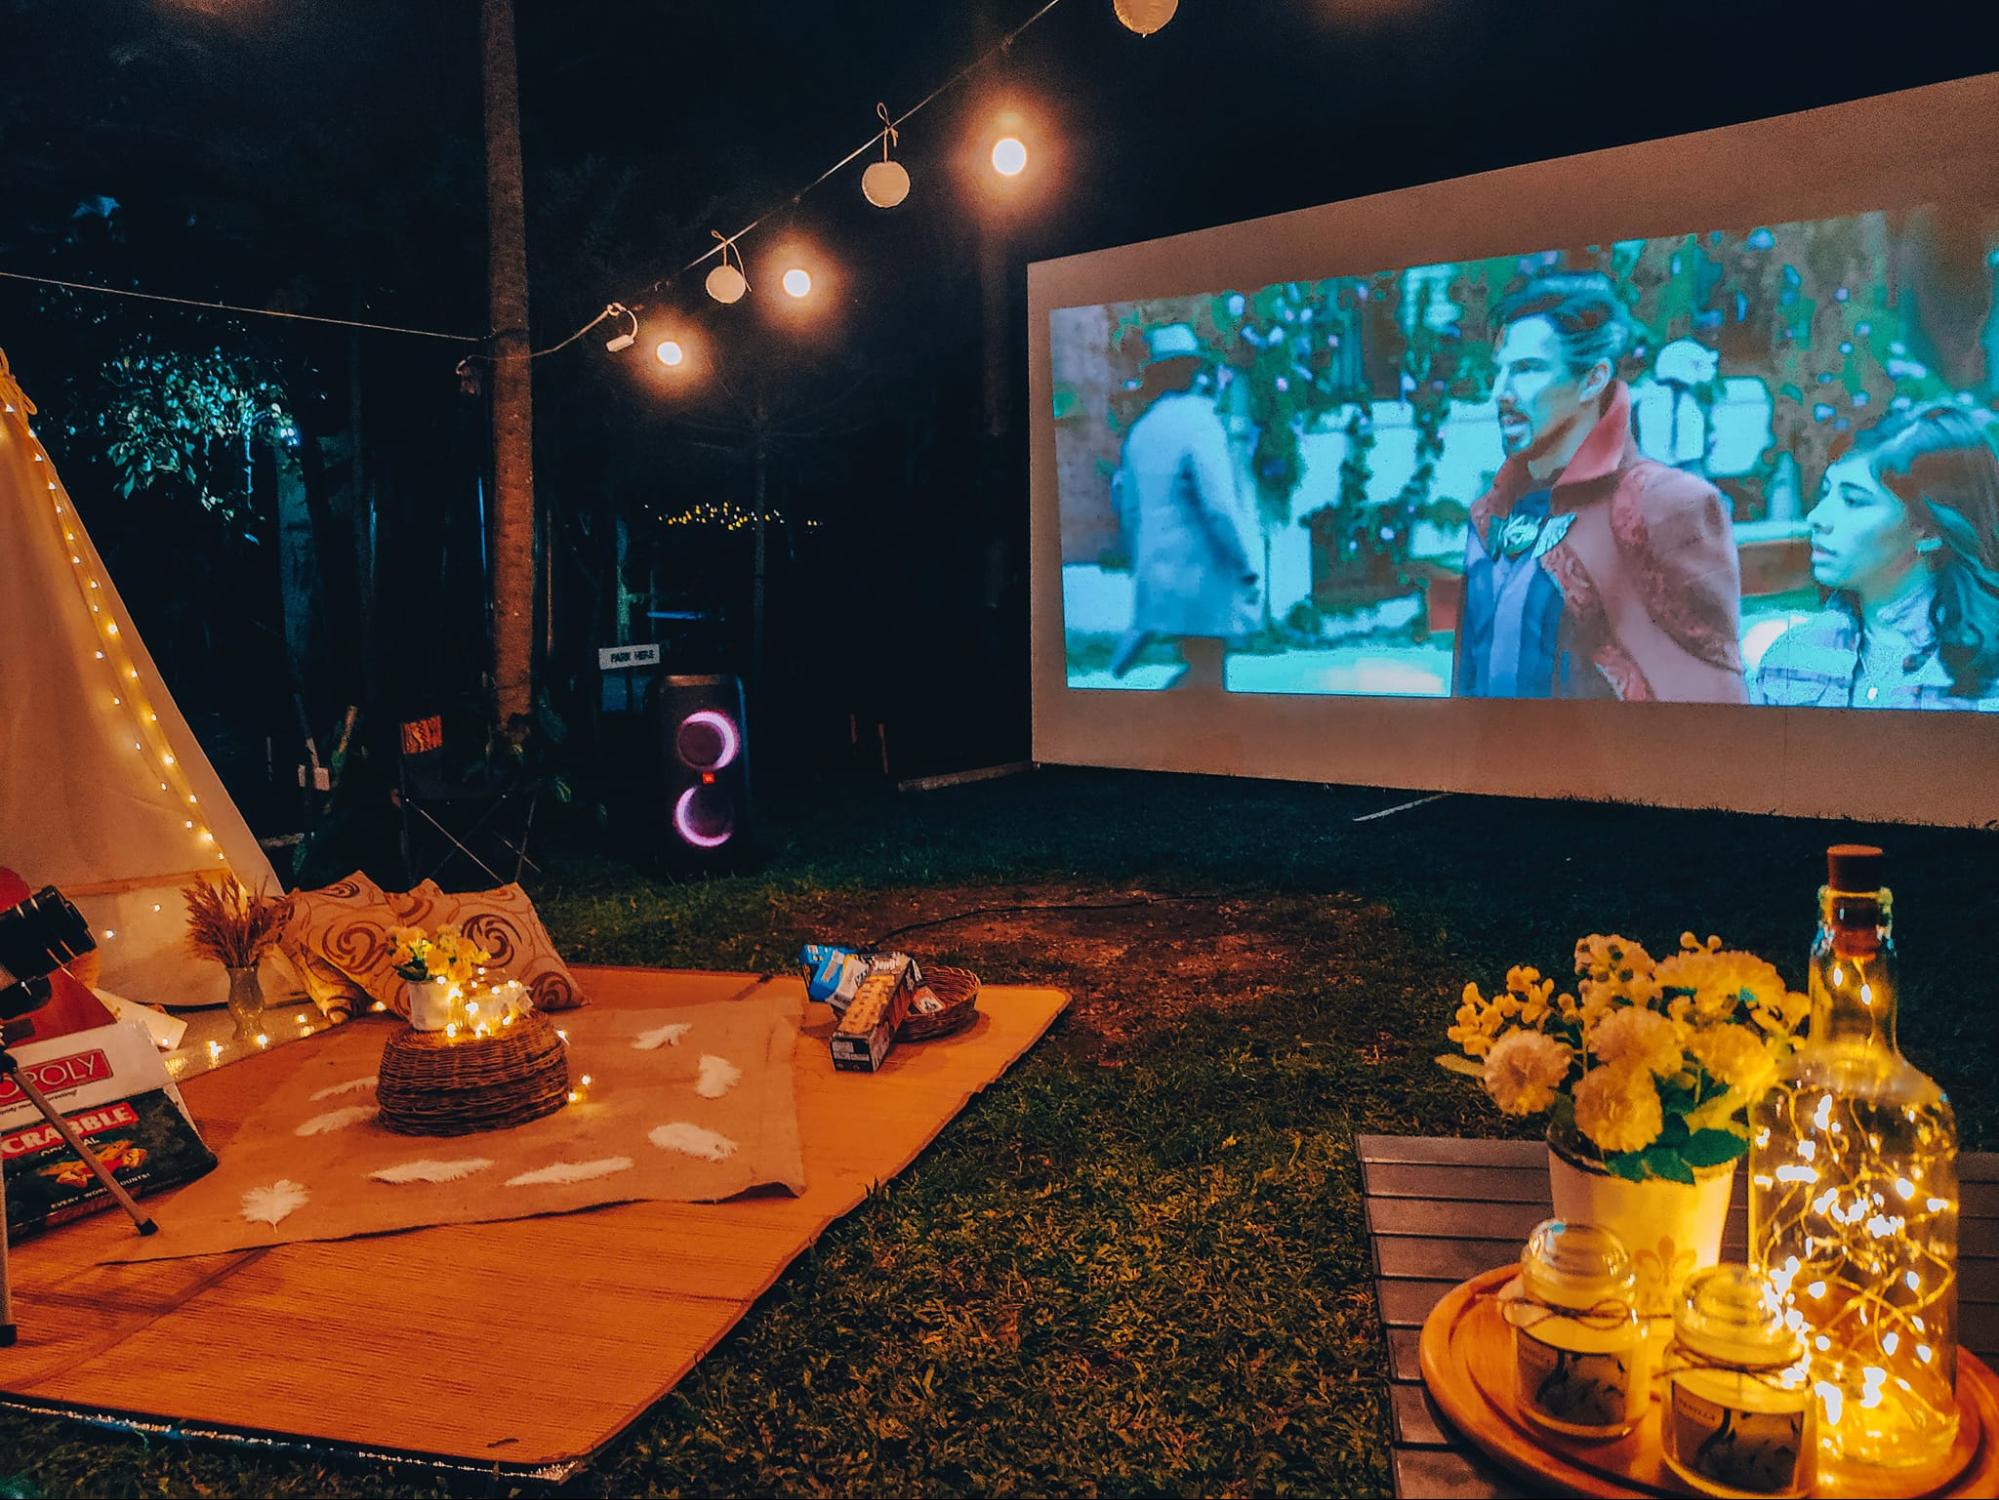 Paping's Staycation and Campsite - giant outdoor cinema